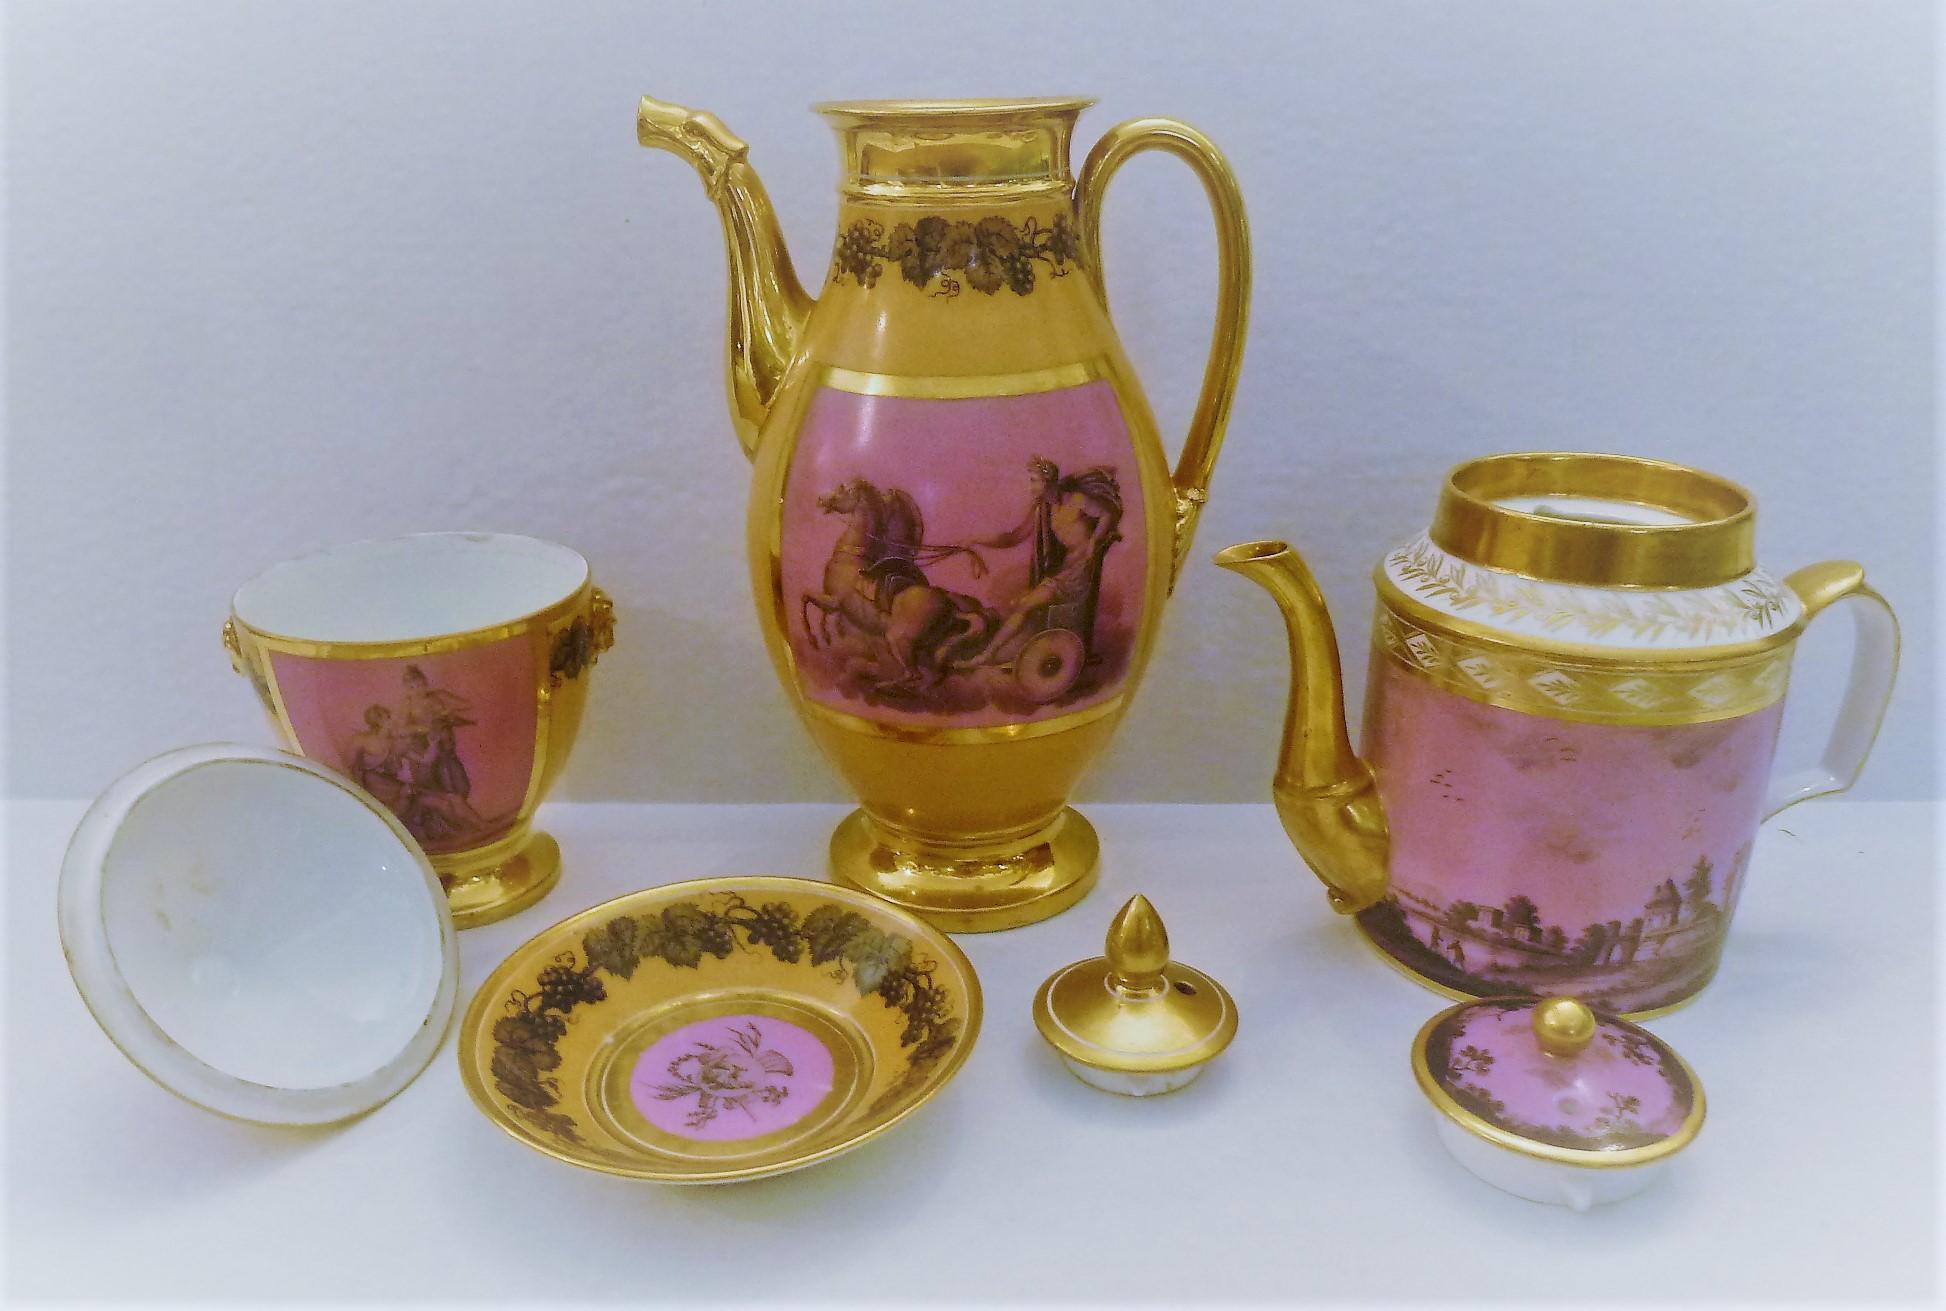 Early 19th century Paris porcelain coffee, tea and sugar items. All three pieces feature delicately hand painted scenes. Accented with gilt decoration.